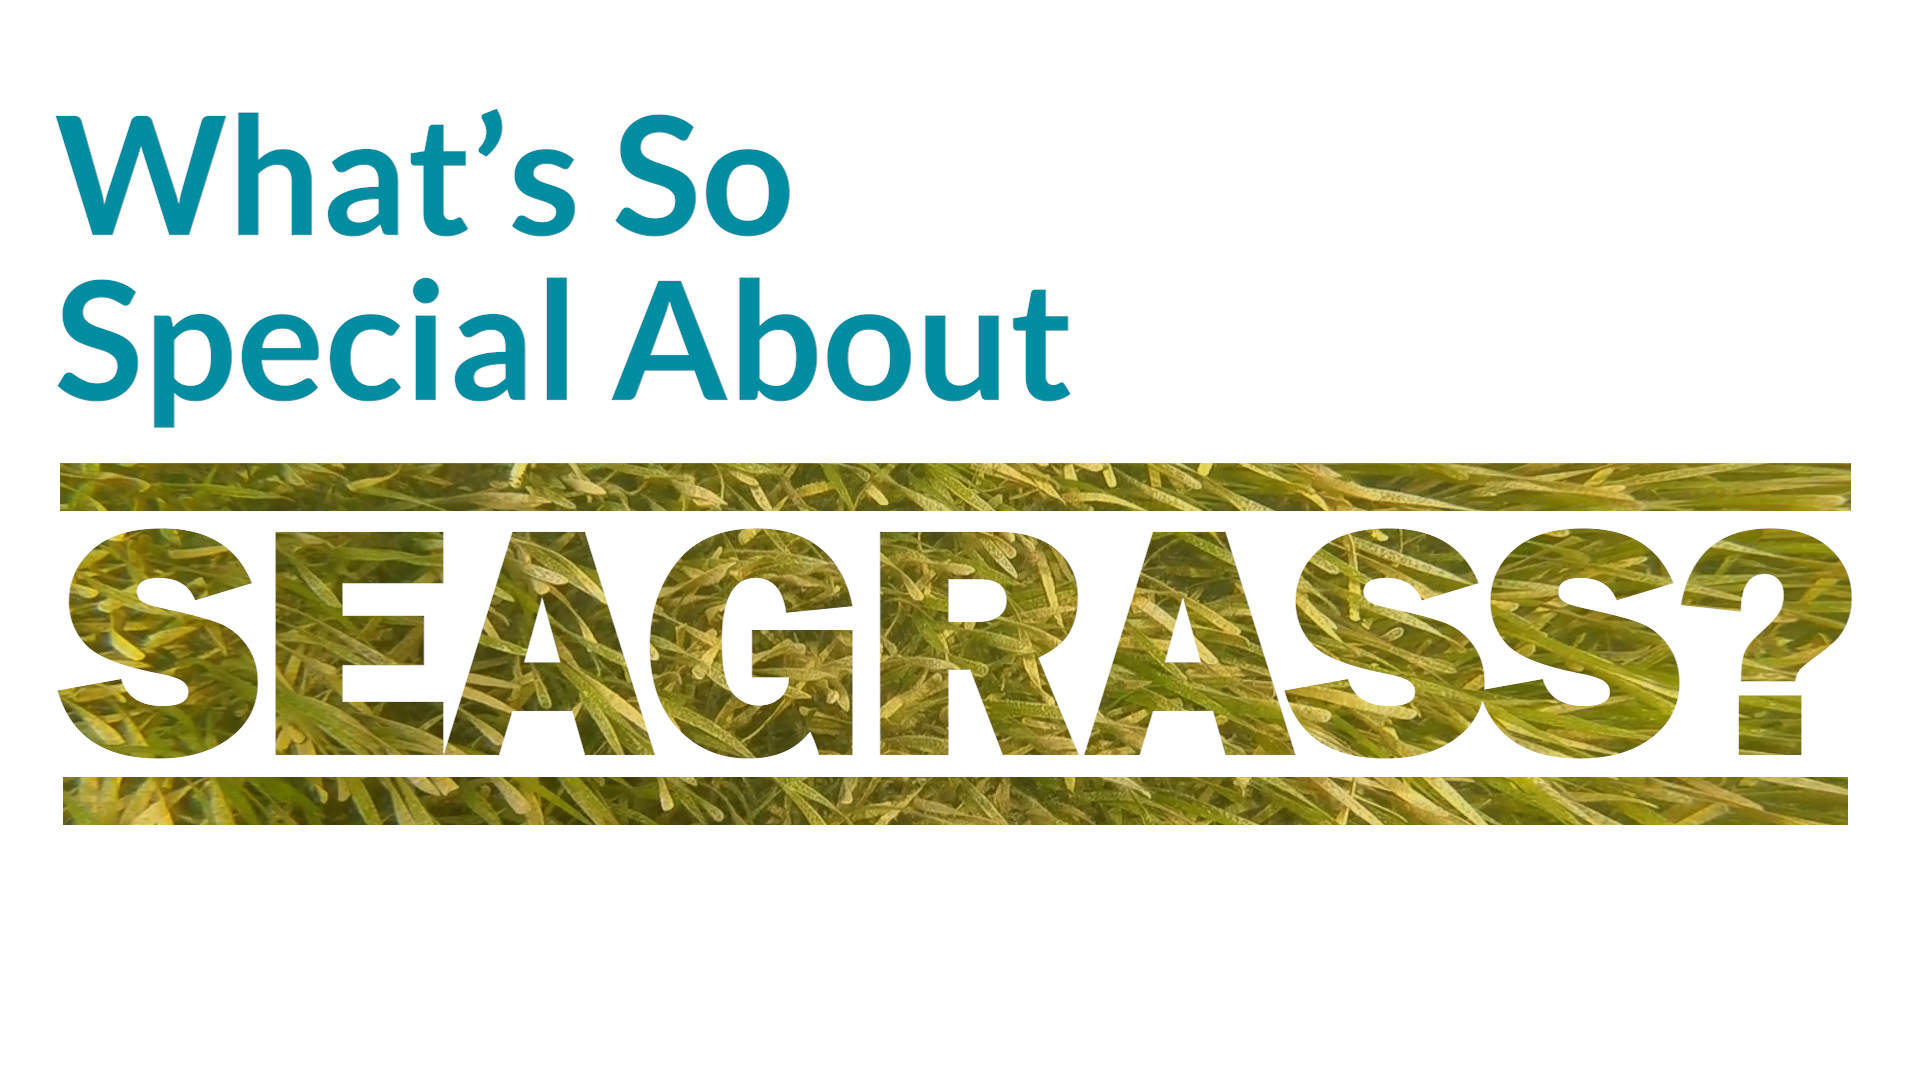 what's so special about seagrass